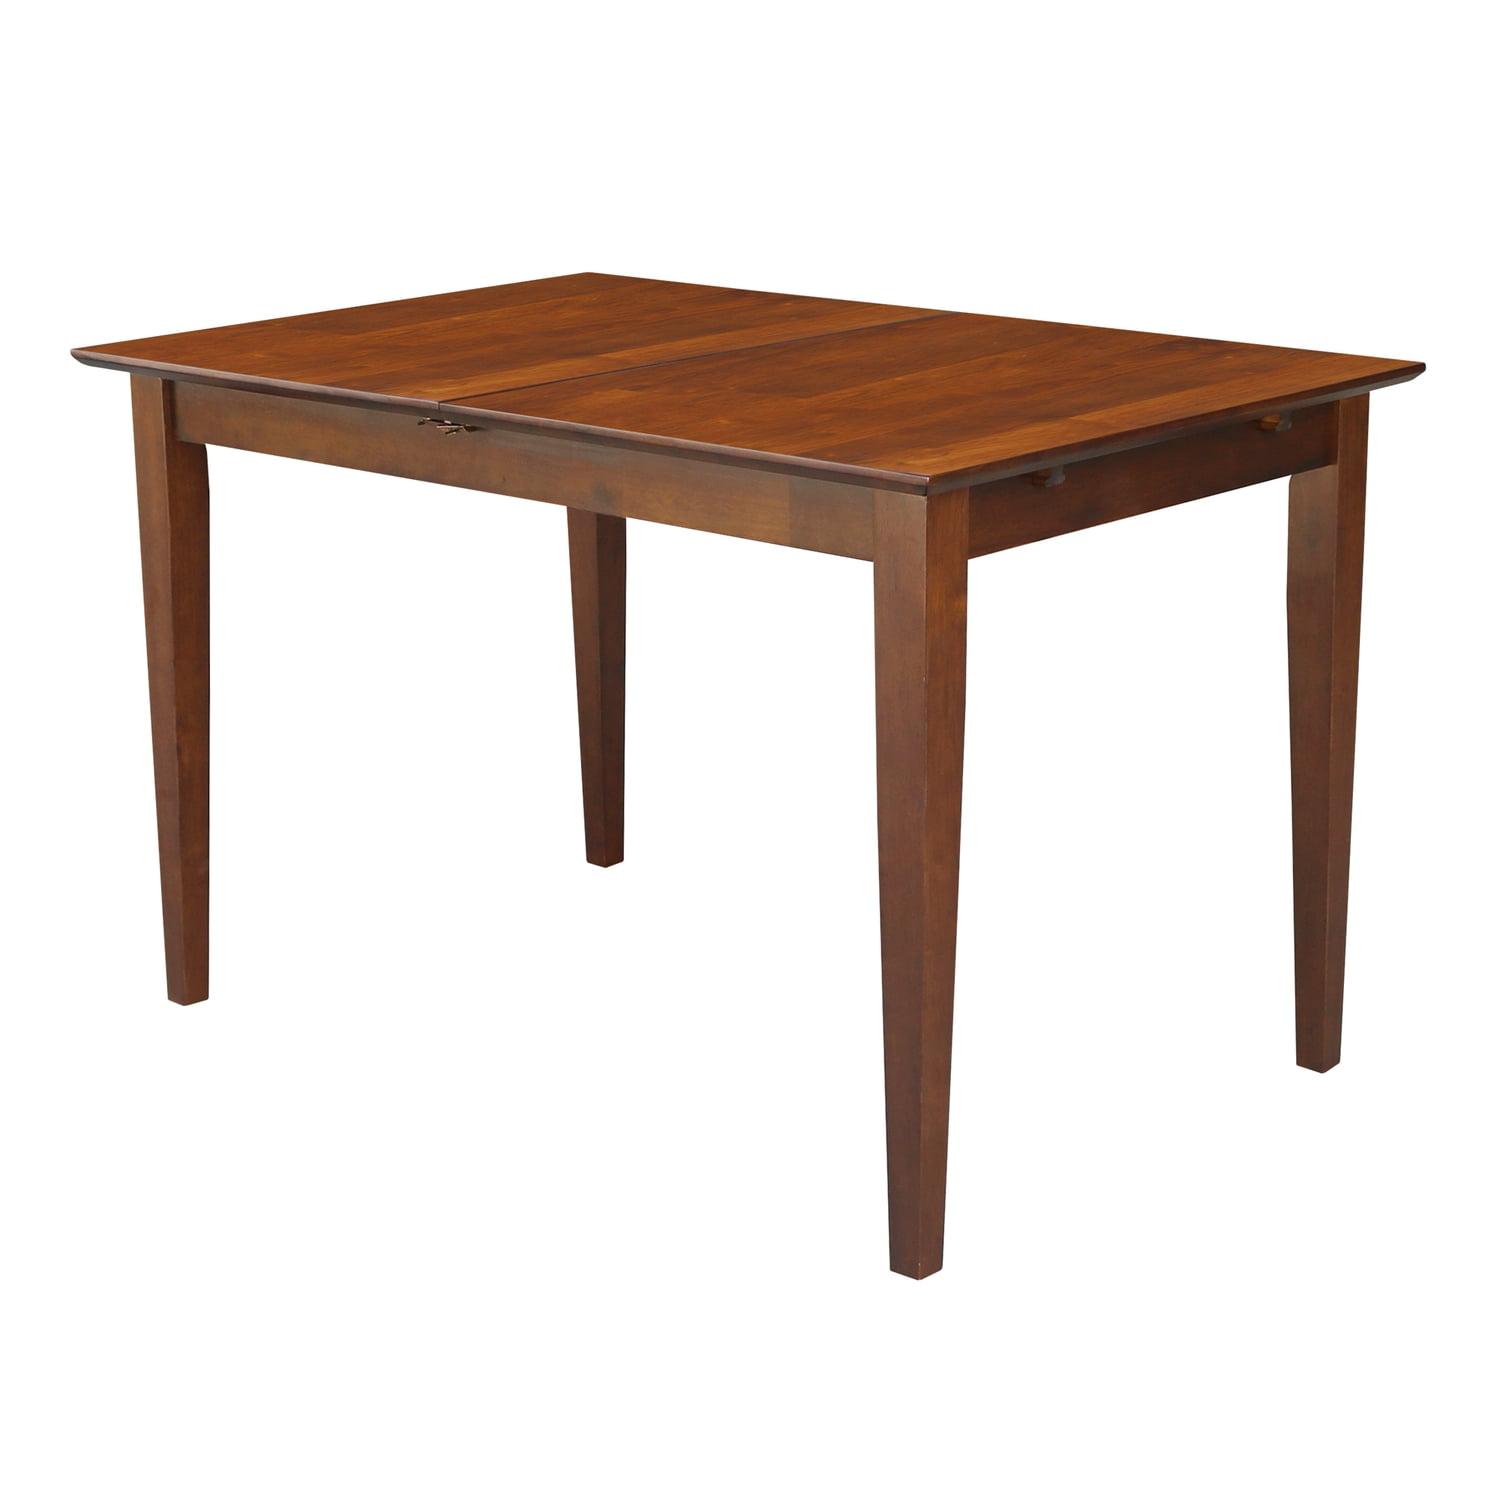 Espresso Solid Wood Extendable Dining Table with Butterfly Extension